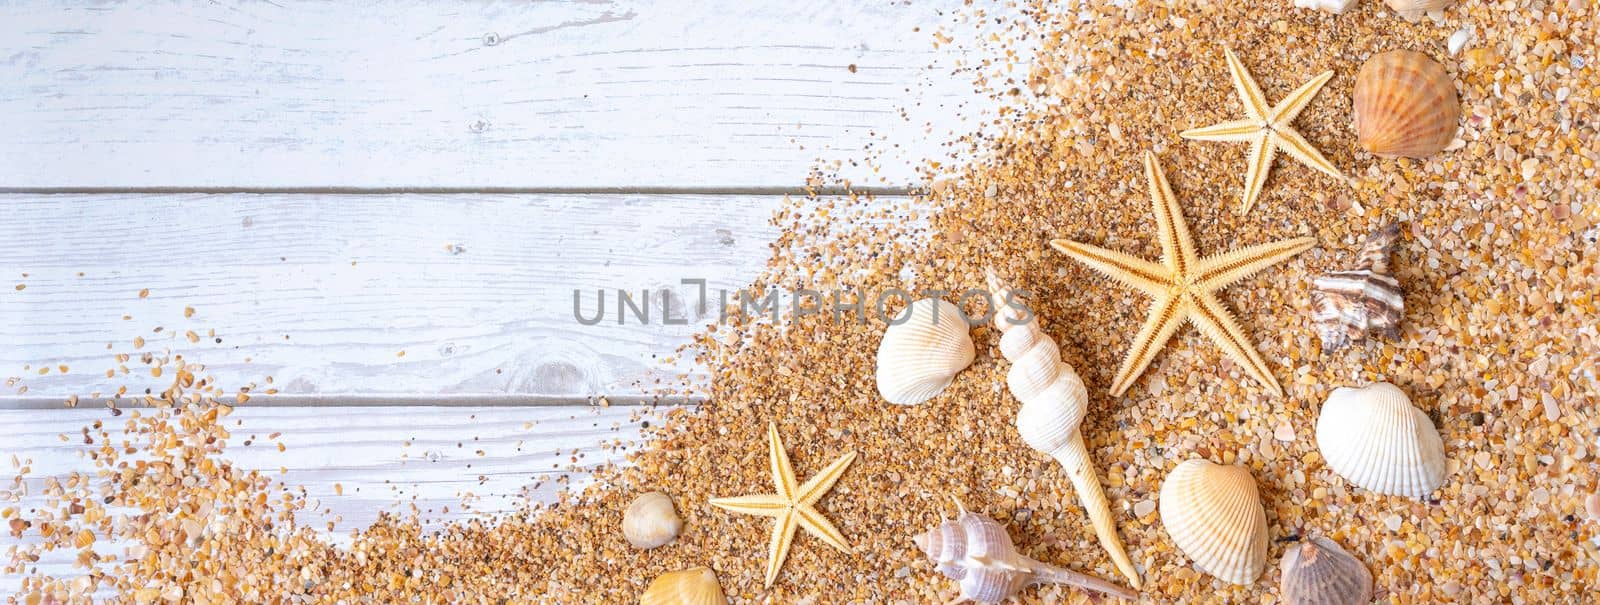 Sand seashells baner background. Summer time concept with sea shells and starfish on wooden background and sand by Matiunina